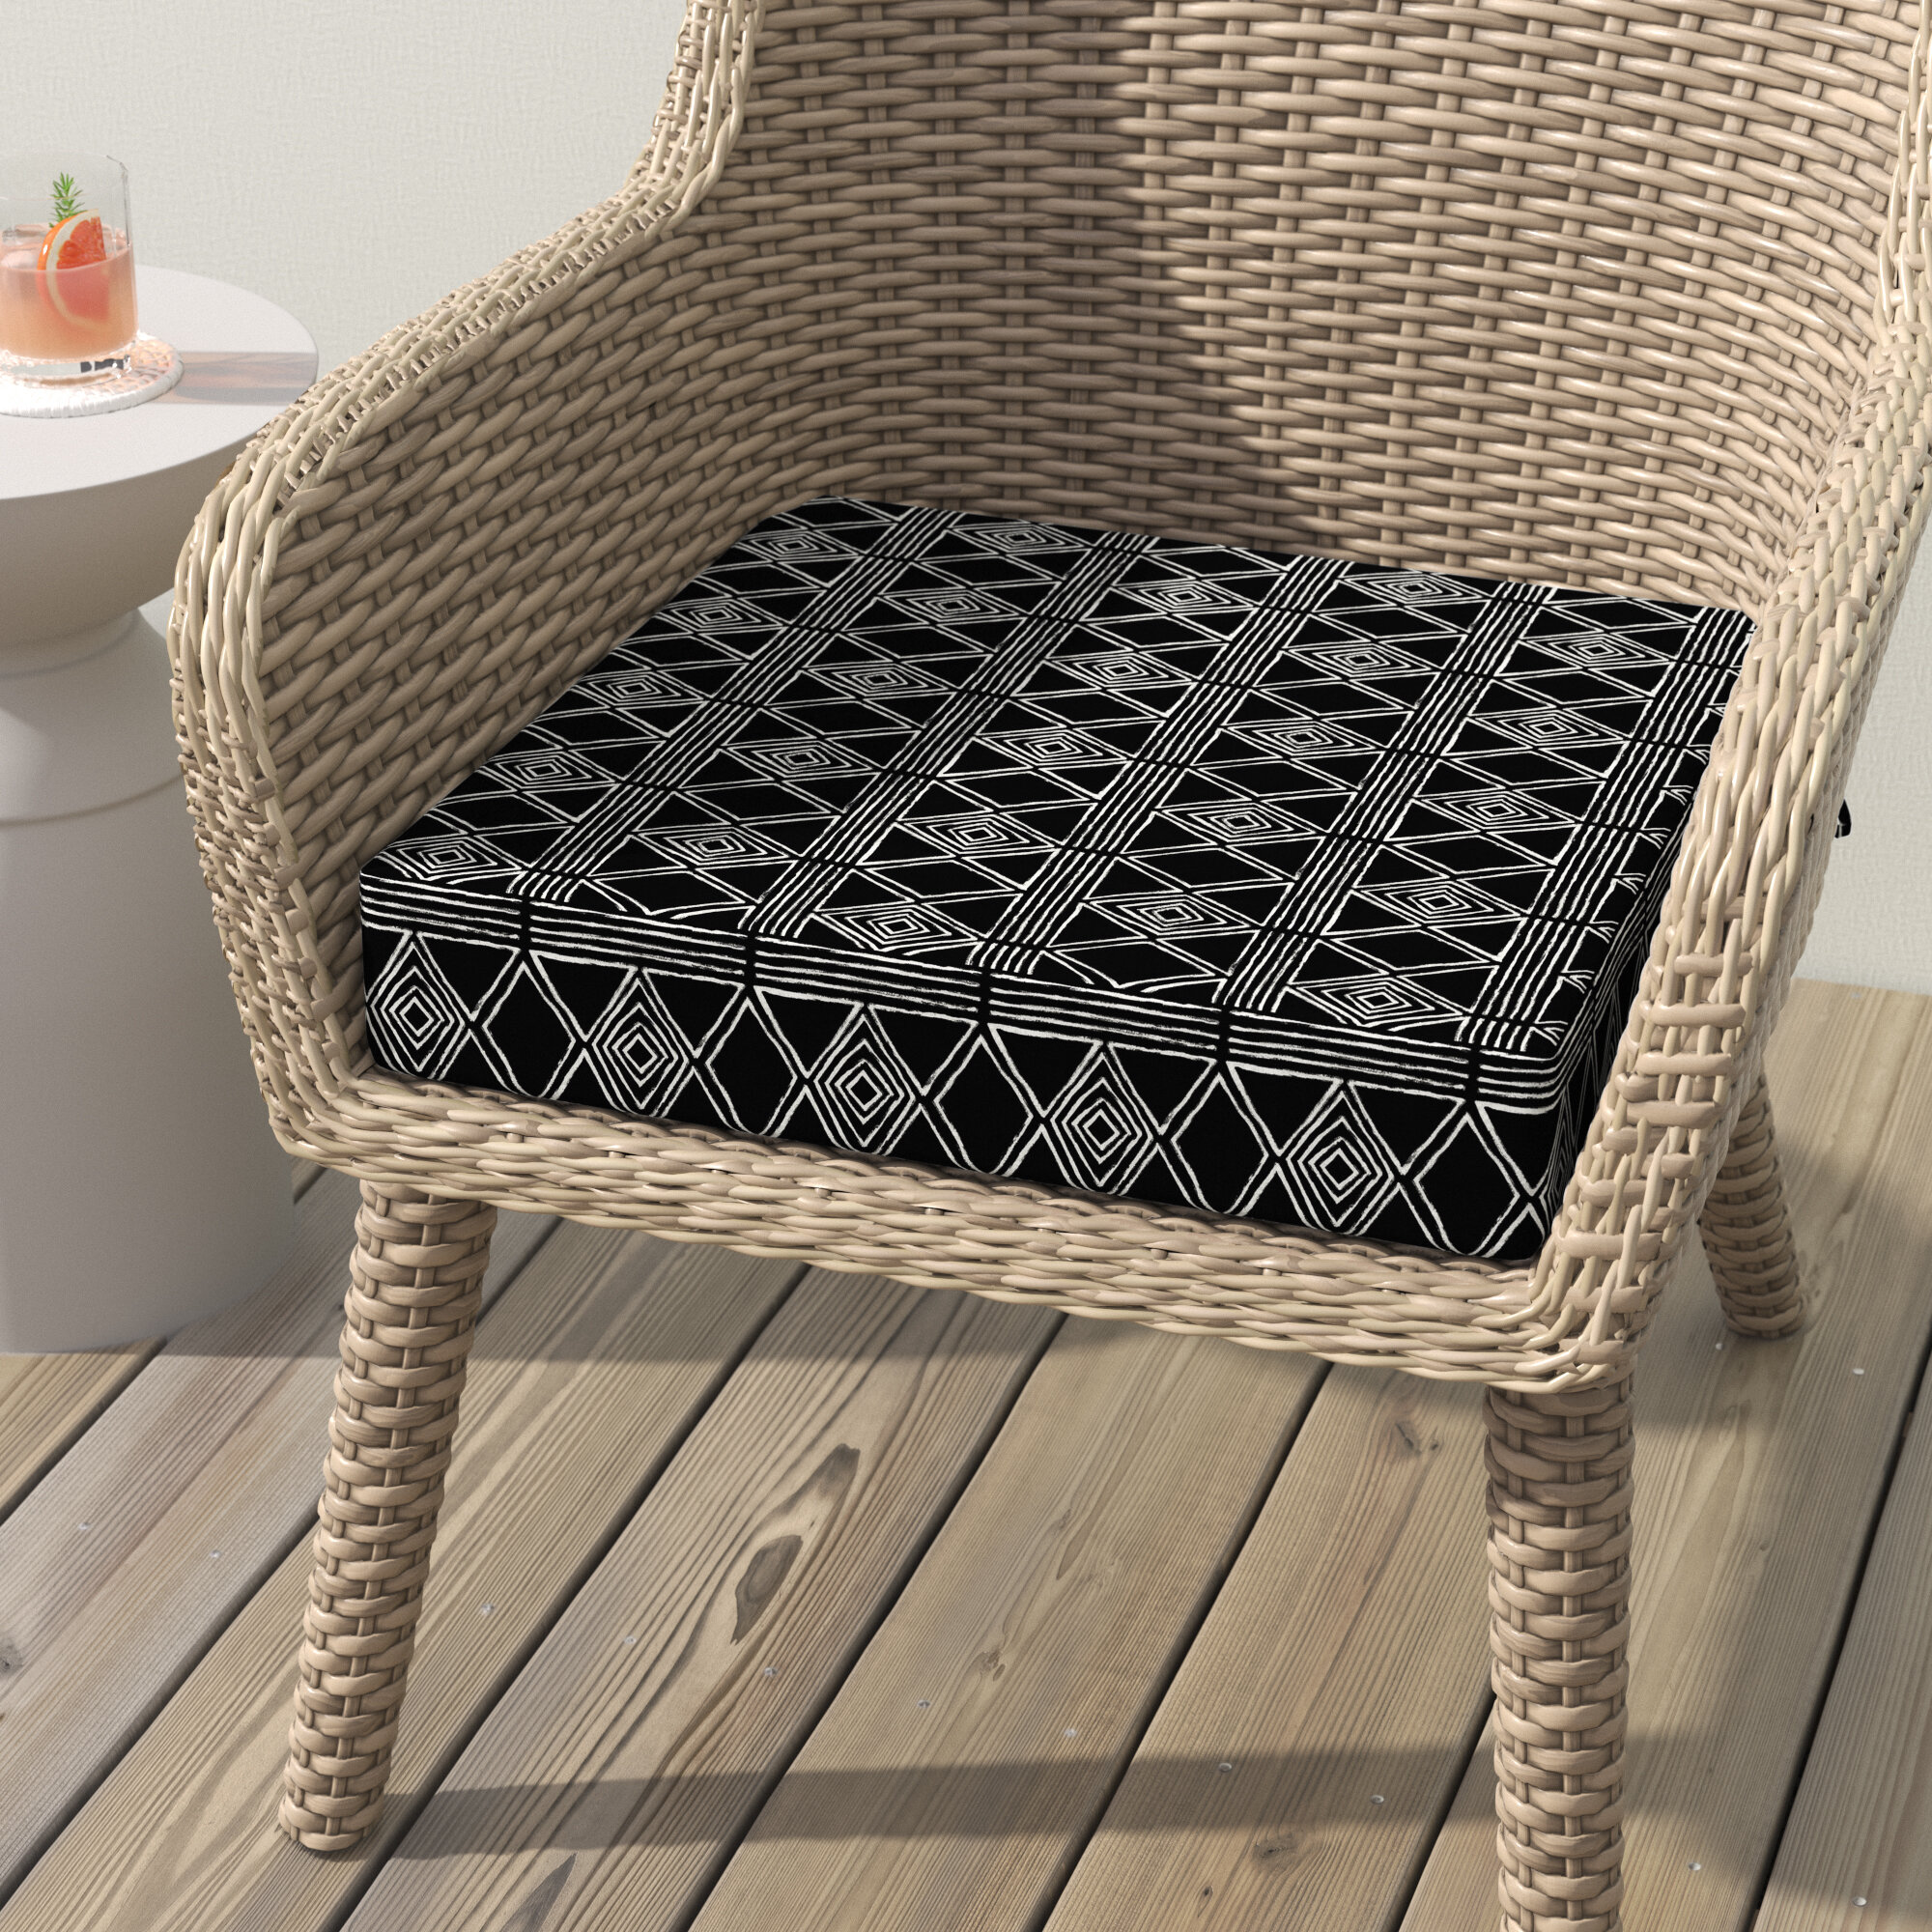 1PC Bohemian Outdoor Patio Chair Seat Pads, Square Floor Pillow